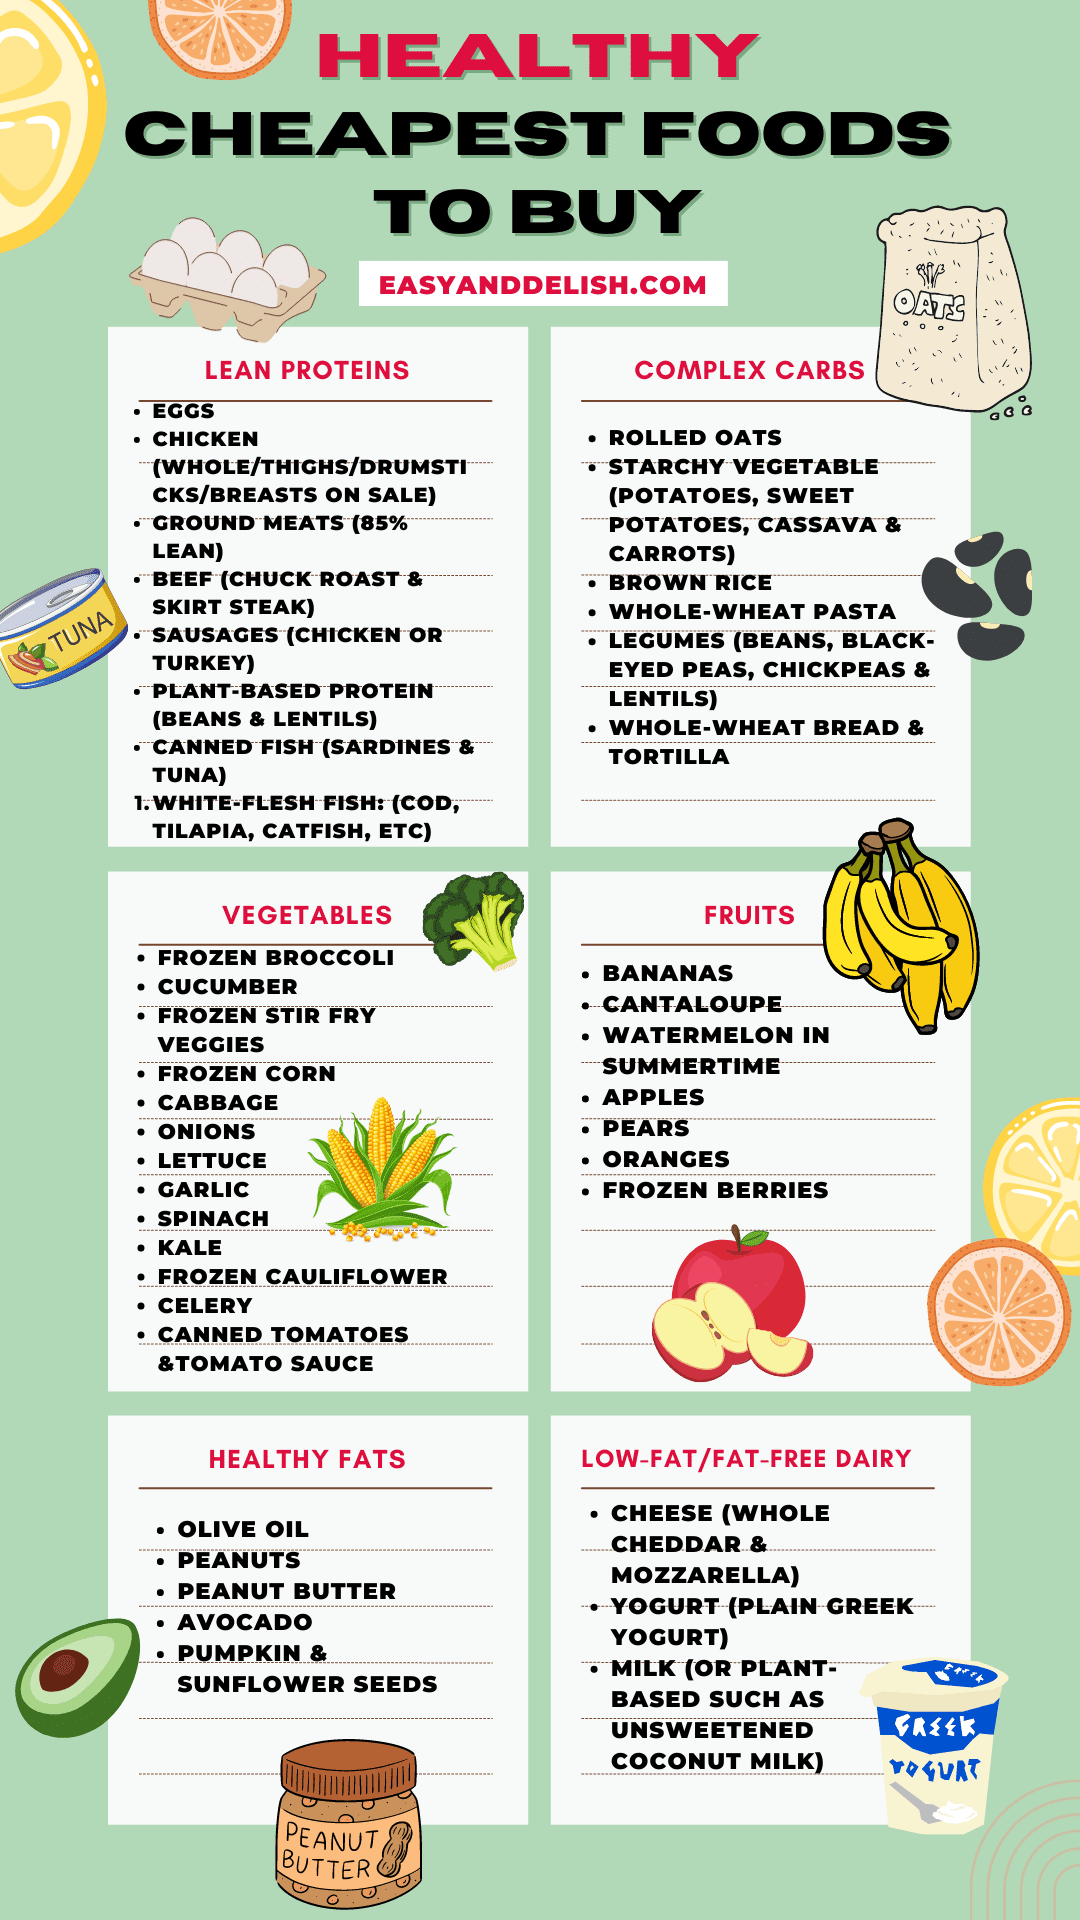 pin showing the list of cheapest foods to buy when broke or on a tight budget.